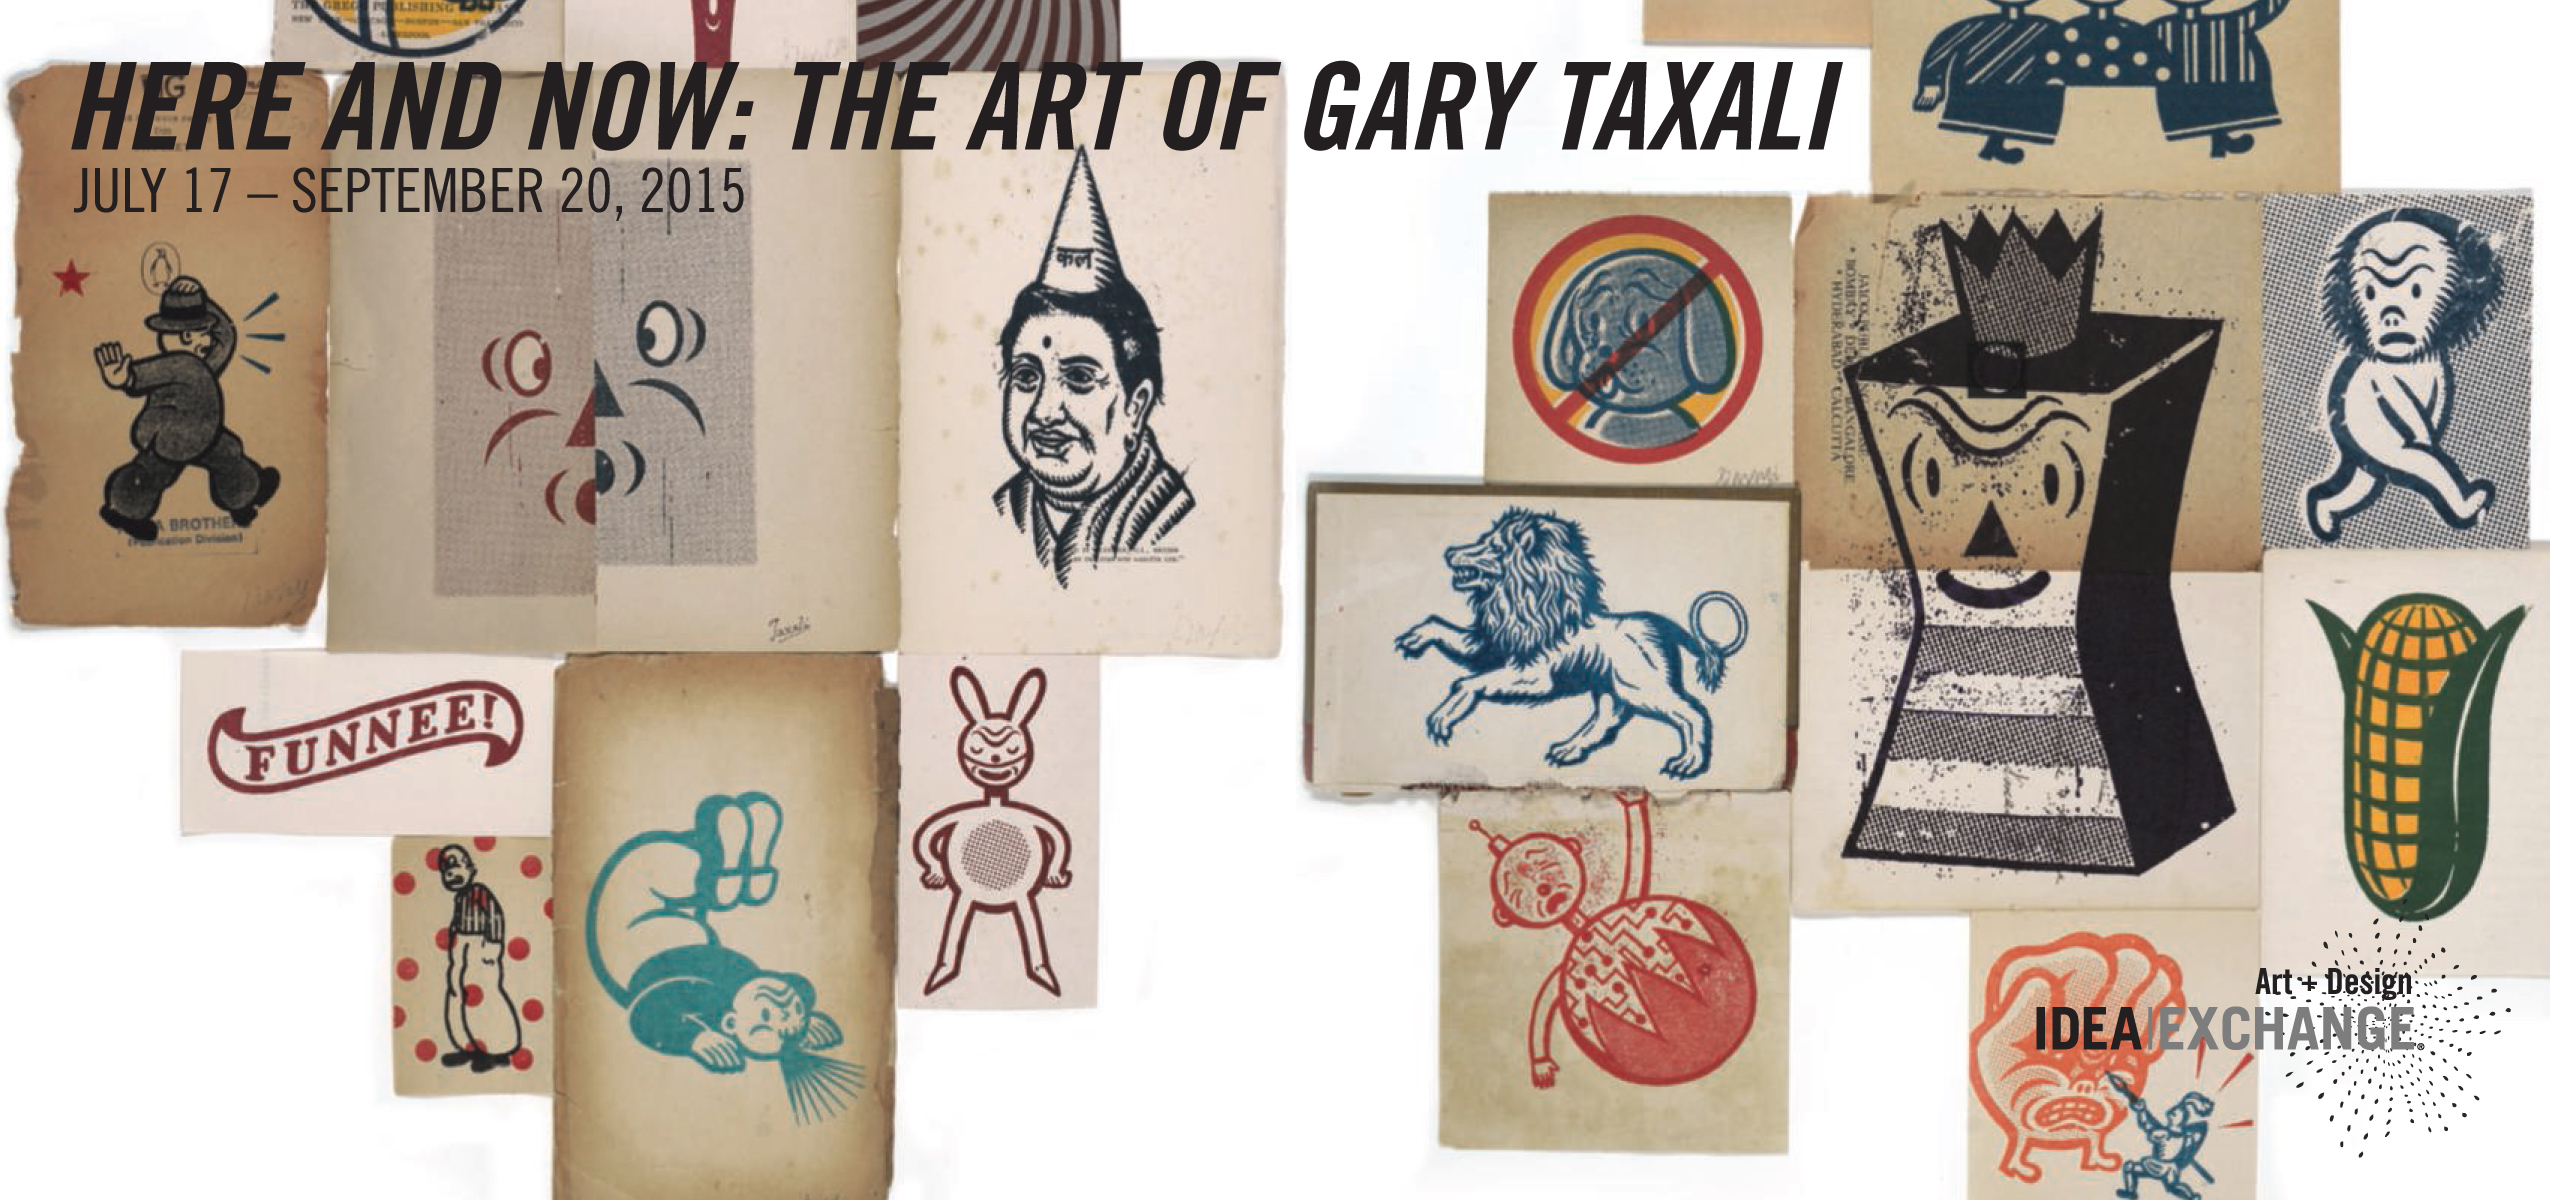 Gary Taxali’s First Public Exhibition at Design at Riverside (Cambridge Galleries) opens July 17th